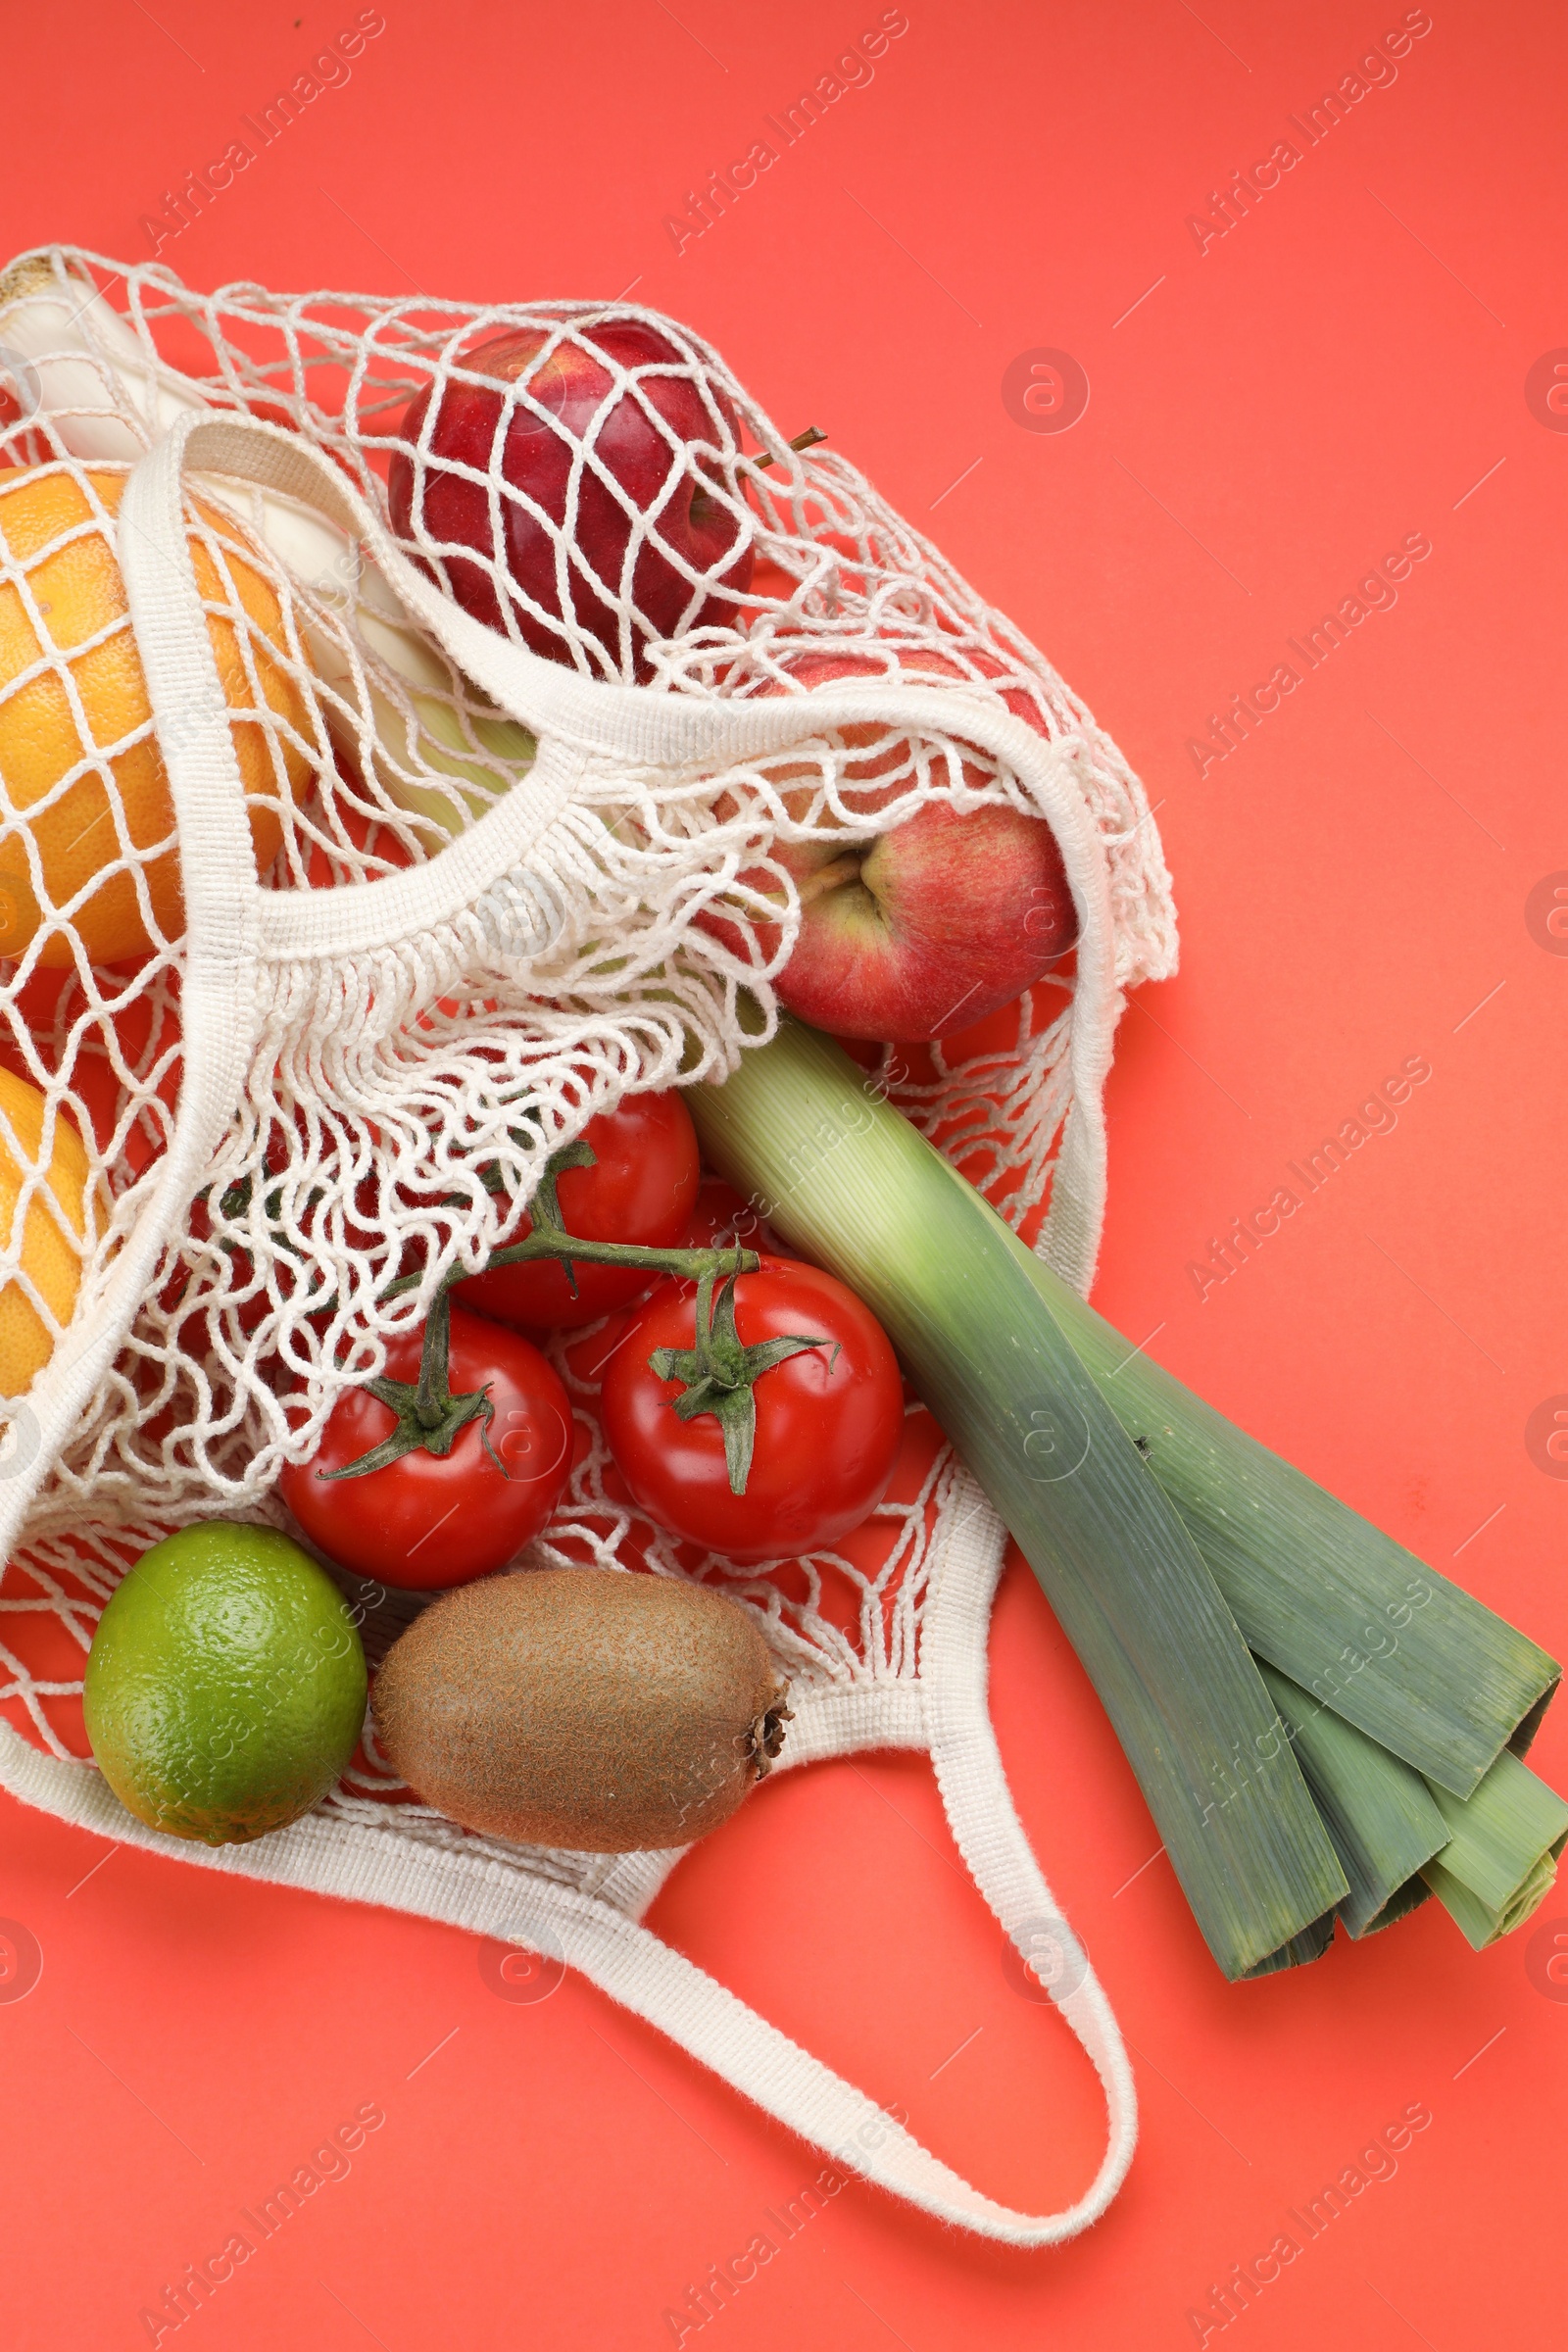 Photo of String bag with different vegetables and fruits on red background, top view